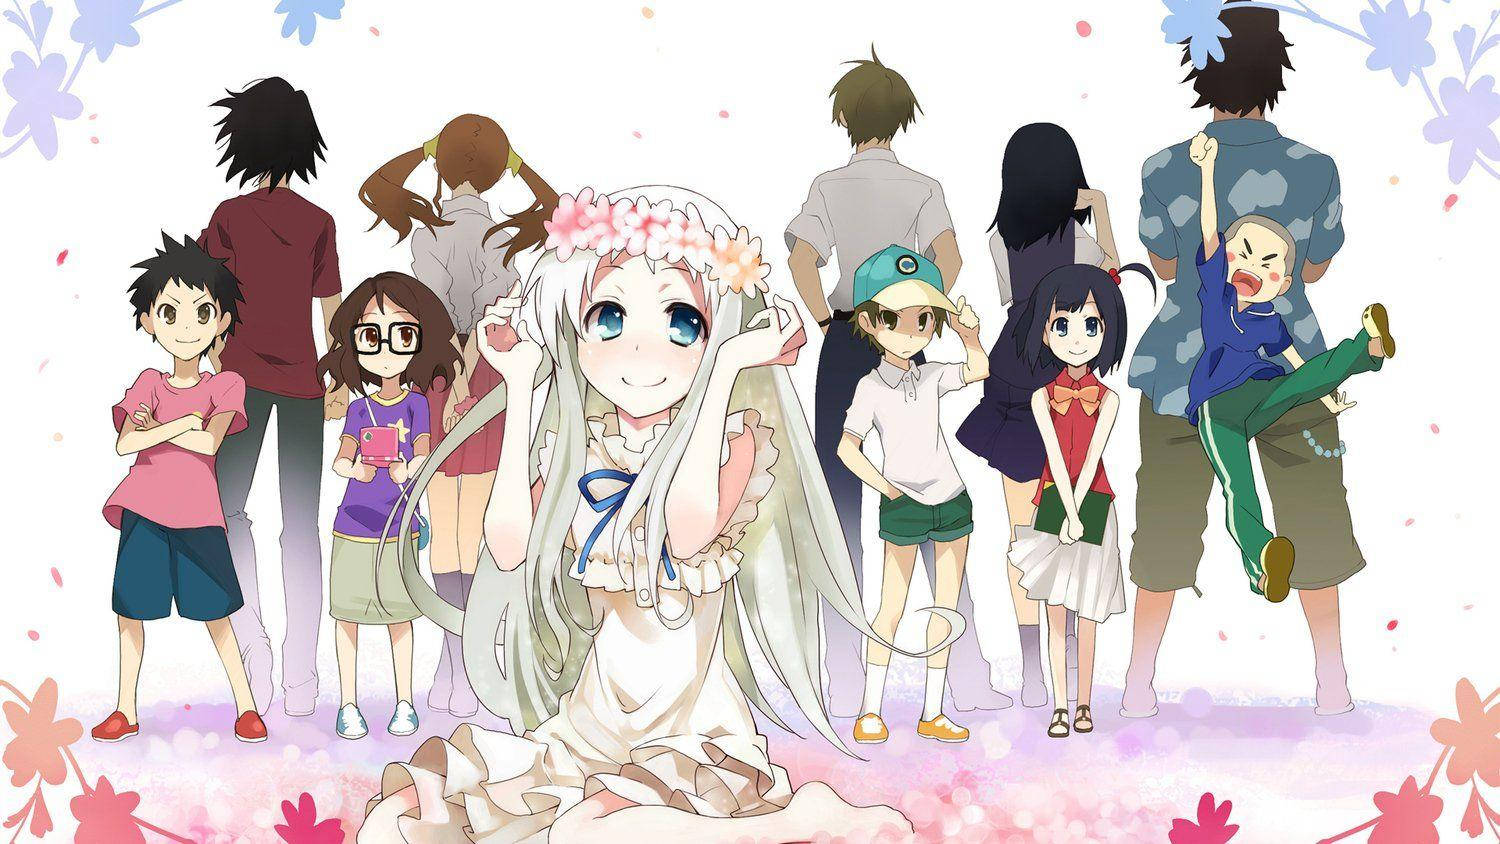 Anohana's Super Peace Busters Communing in Nature Wallpaper